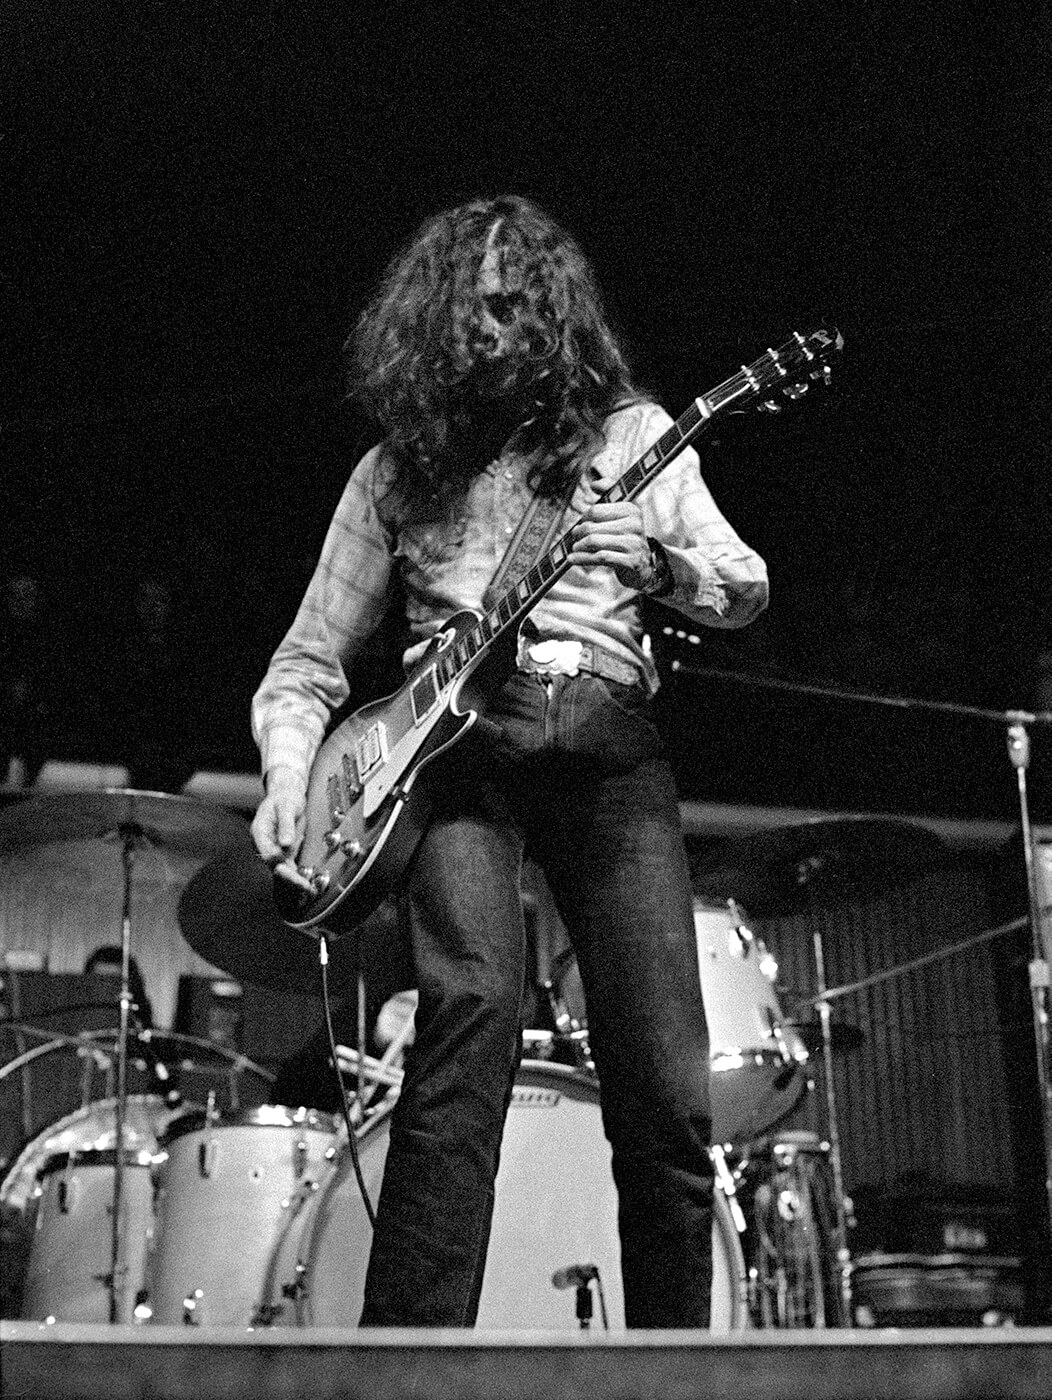 LED ZEPPELIN JIMMY PAGE GIBSON SG GUITAR WWII GERMAN CAP CONCERT PHOTO POSTER 